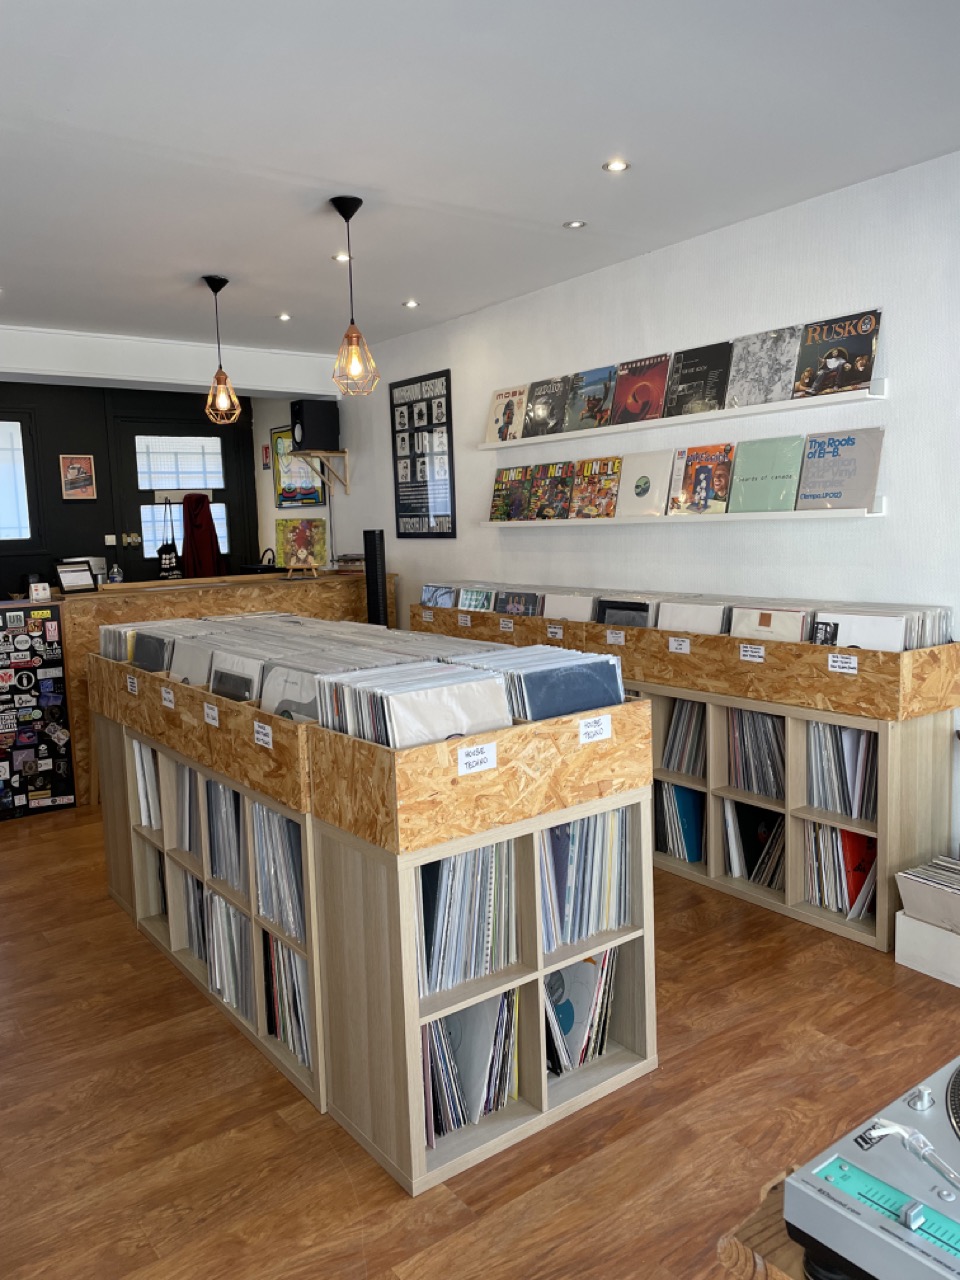 Aesthetic Circle Record Shop - 1 of 3